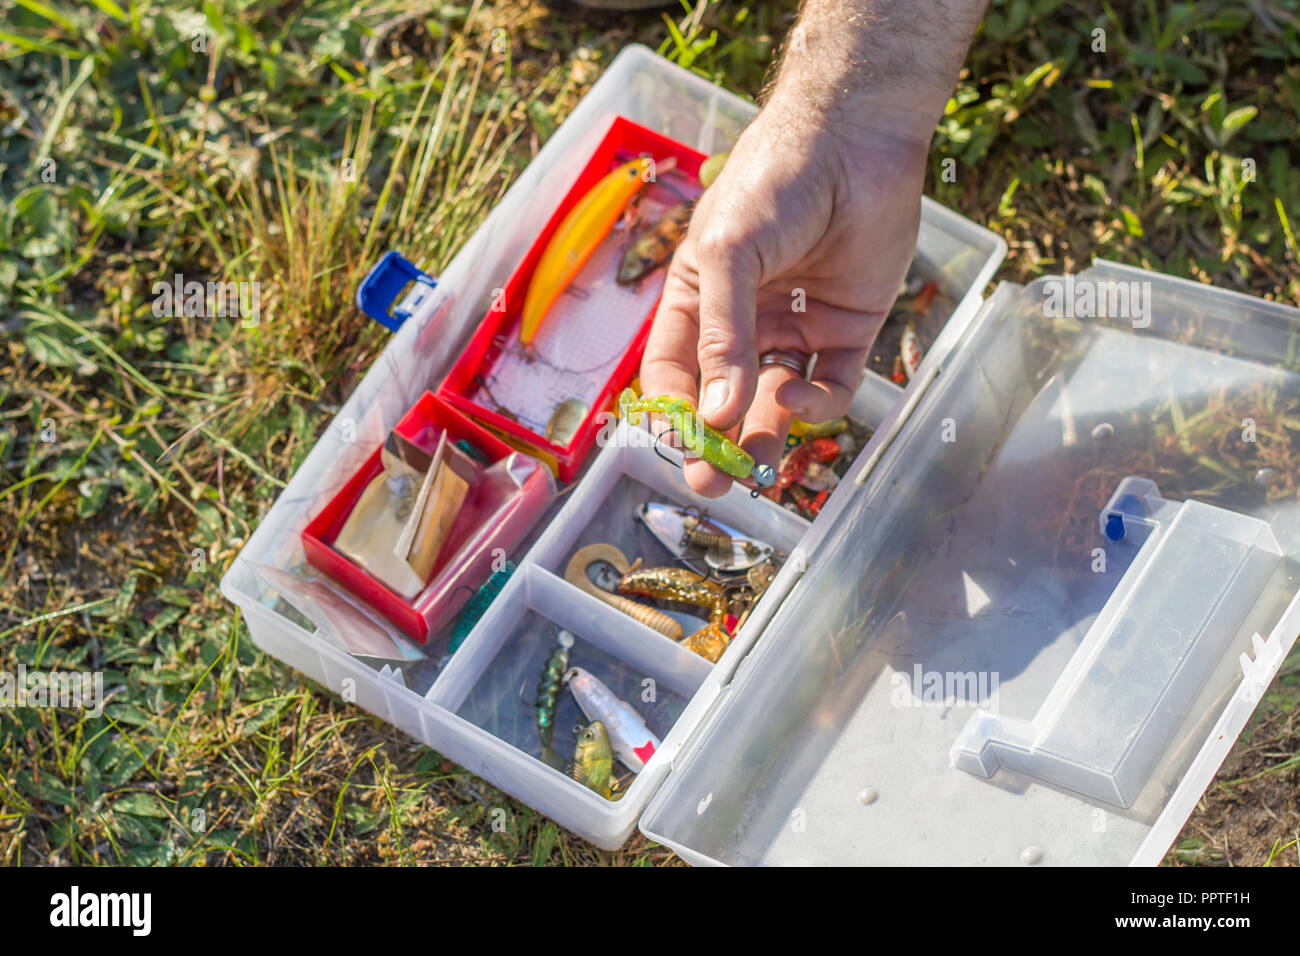 An angler's rod chooses a spinning bait from the box. The fisherman chooses a rubber bait from the box. Stock Photo